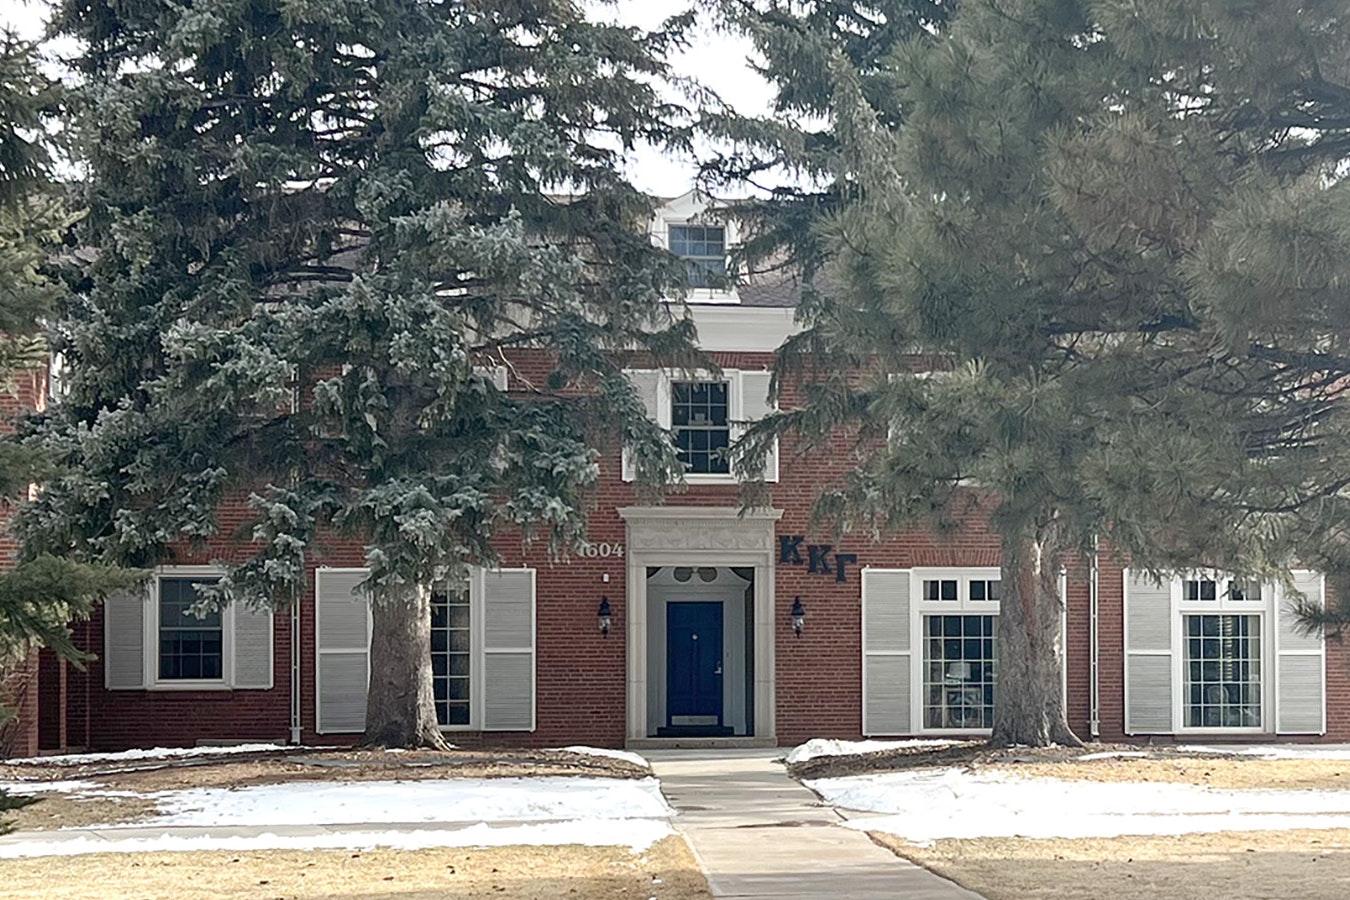 In the wake of national attention and a building furor over transgender issues, University of Wyoming campus police say they've increased patrols past the Kappa Kappa Gamma sorority house in Laramie.